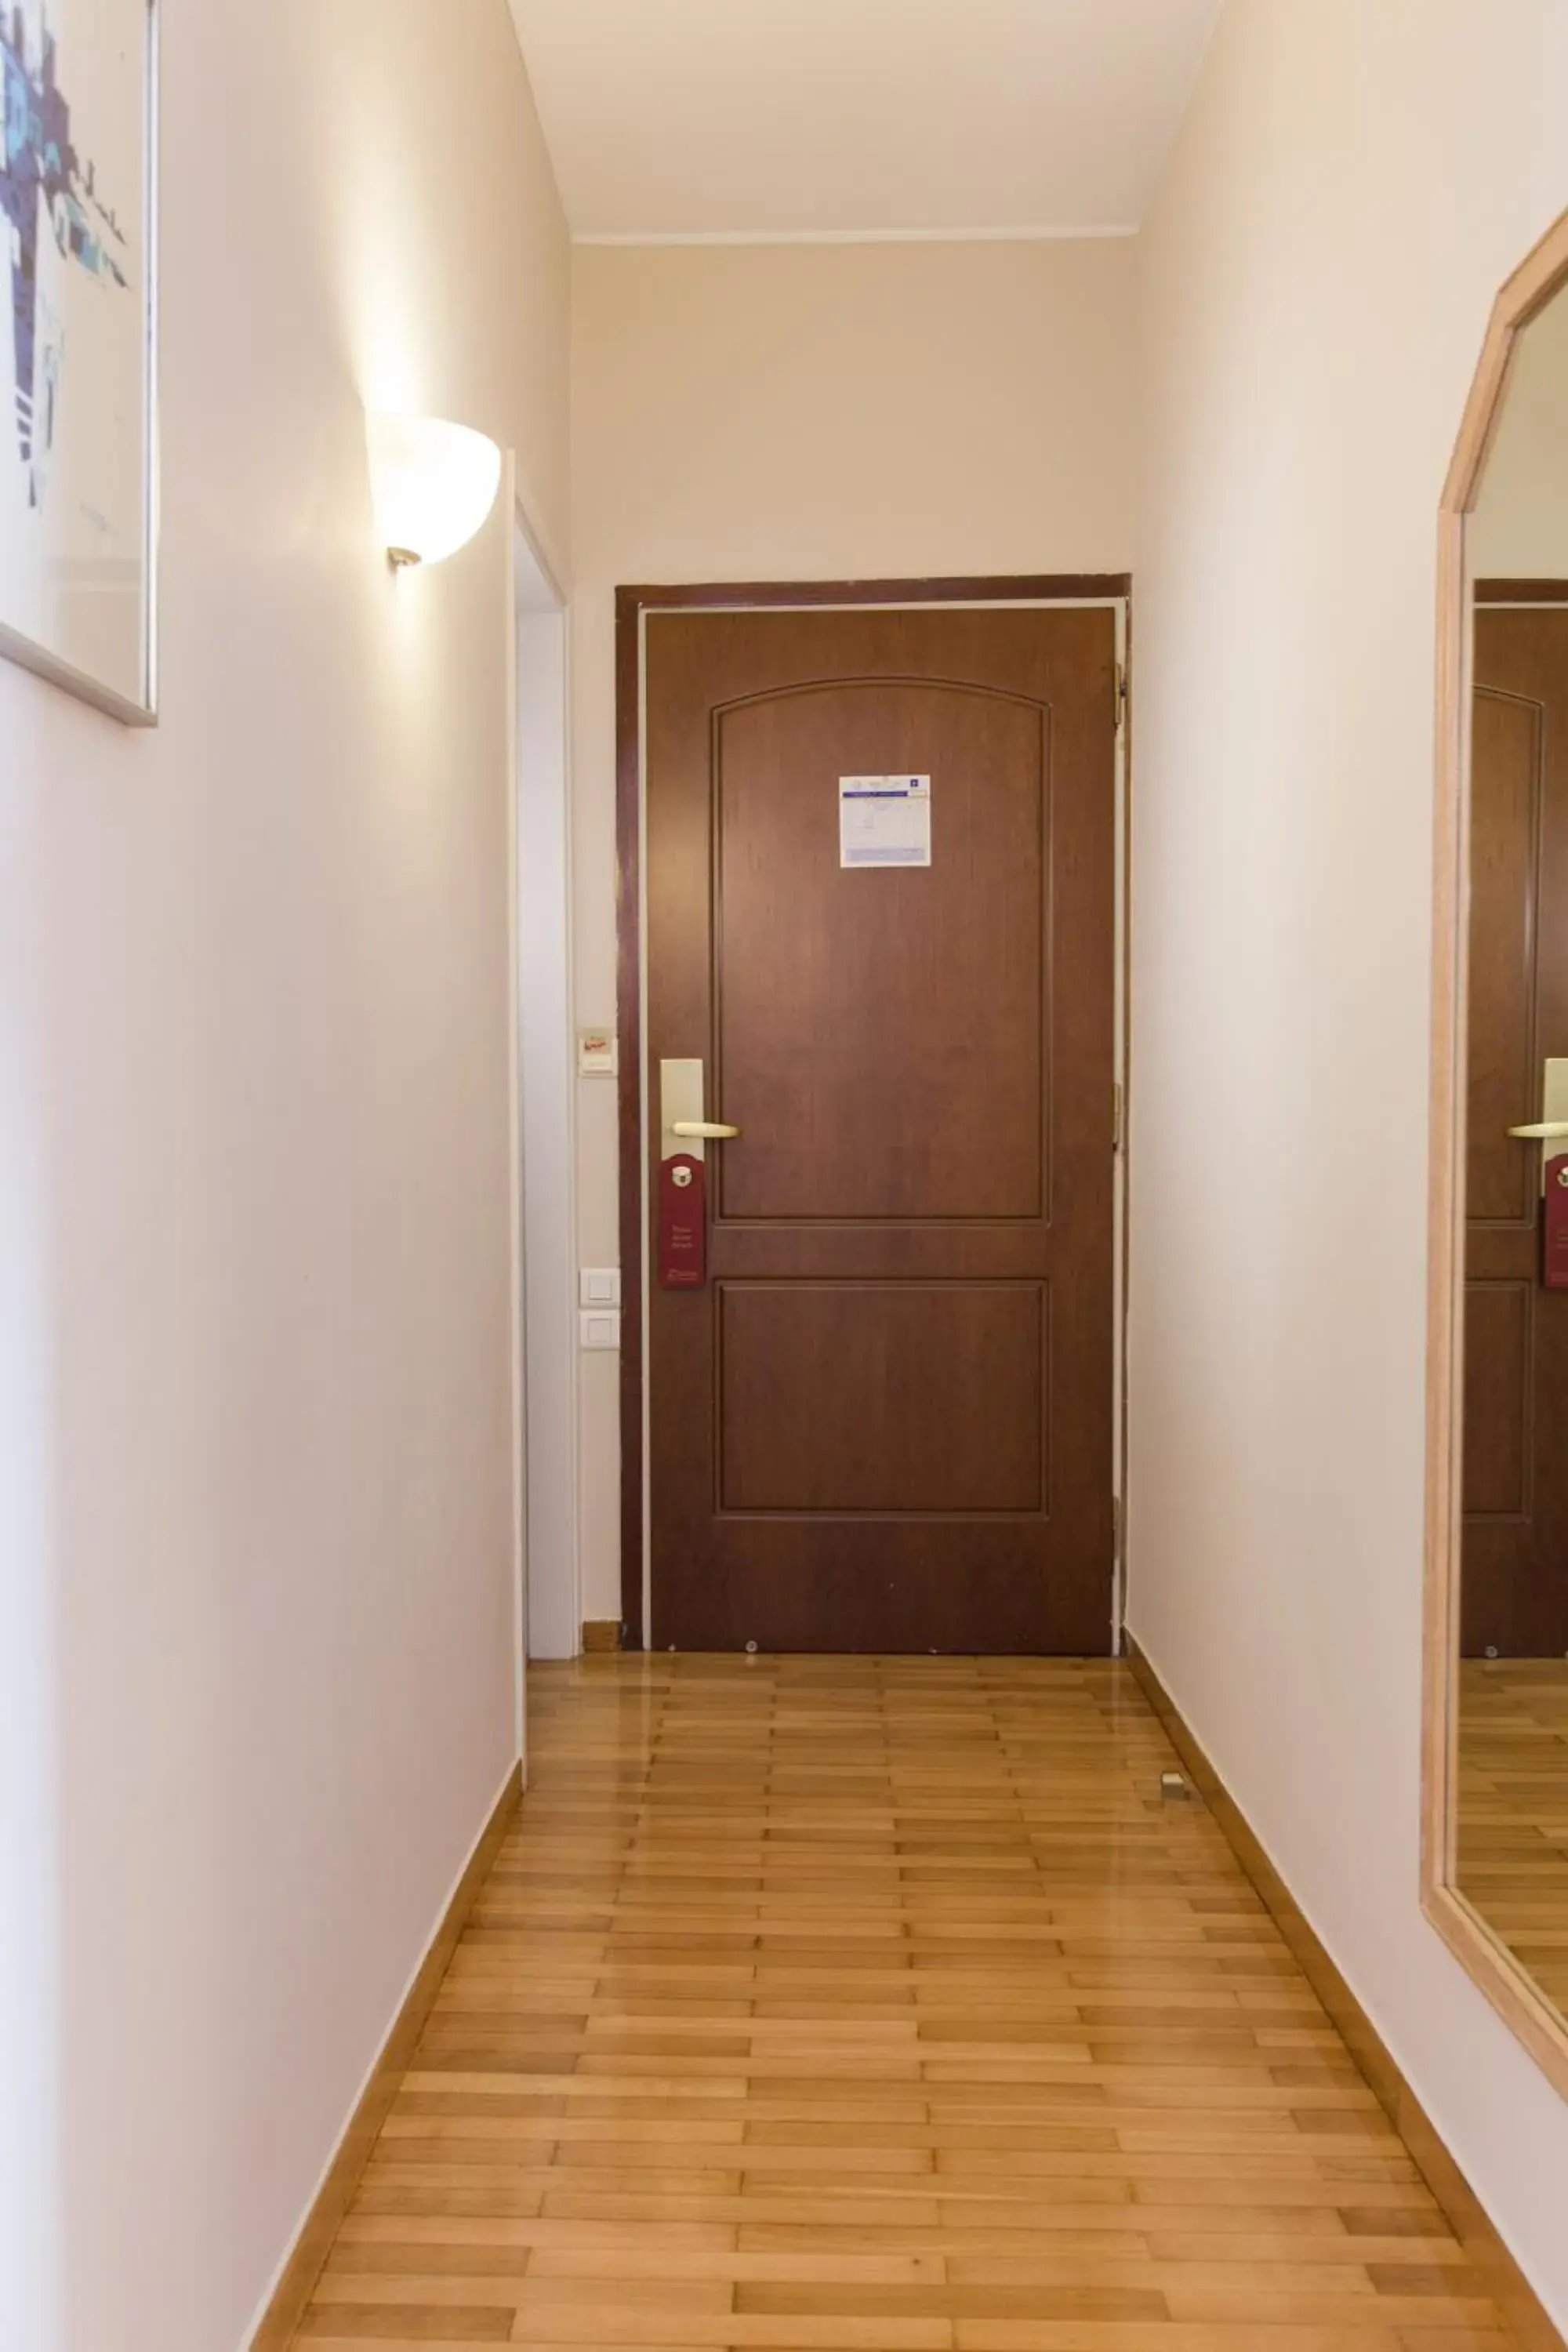 Delice Hotel - Family Apartments